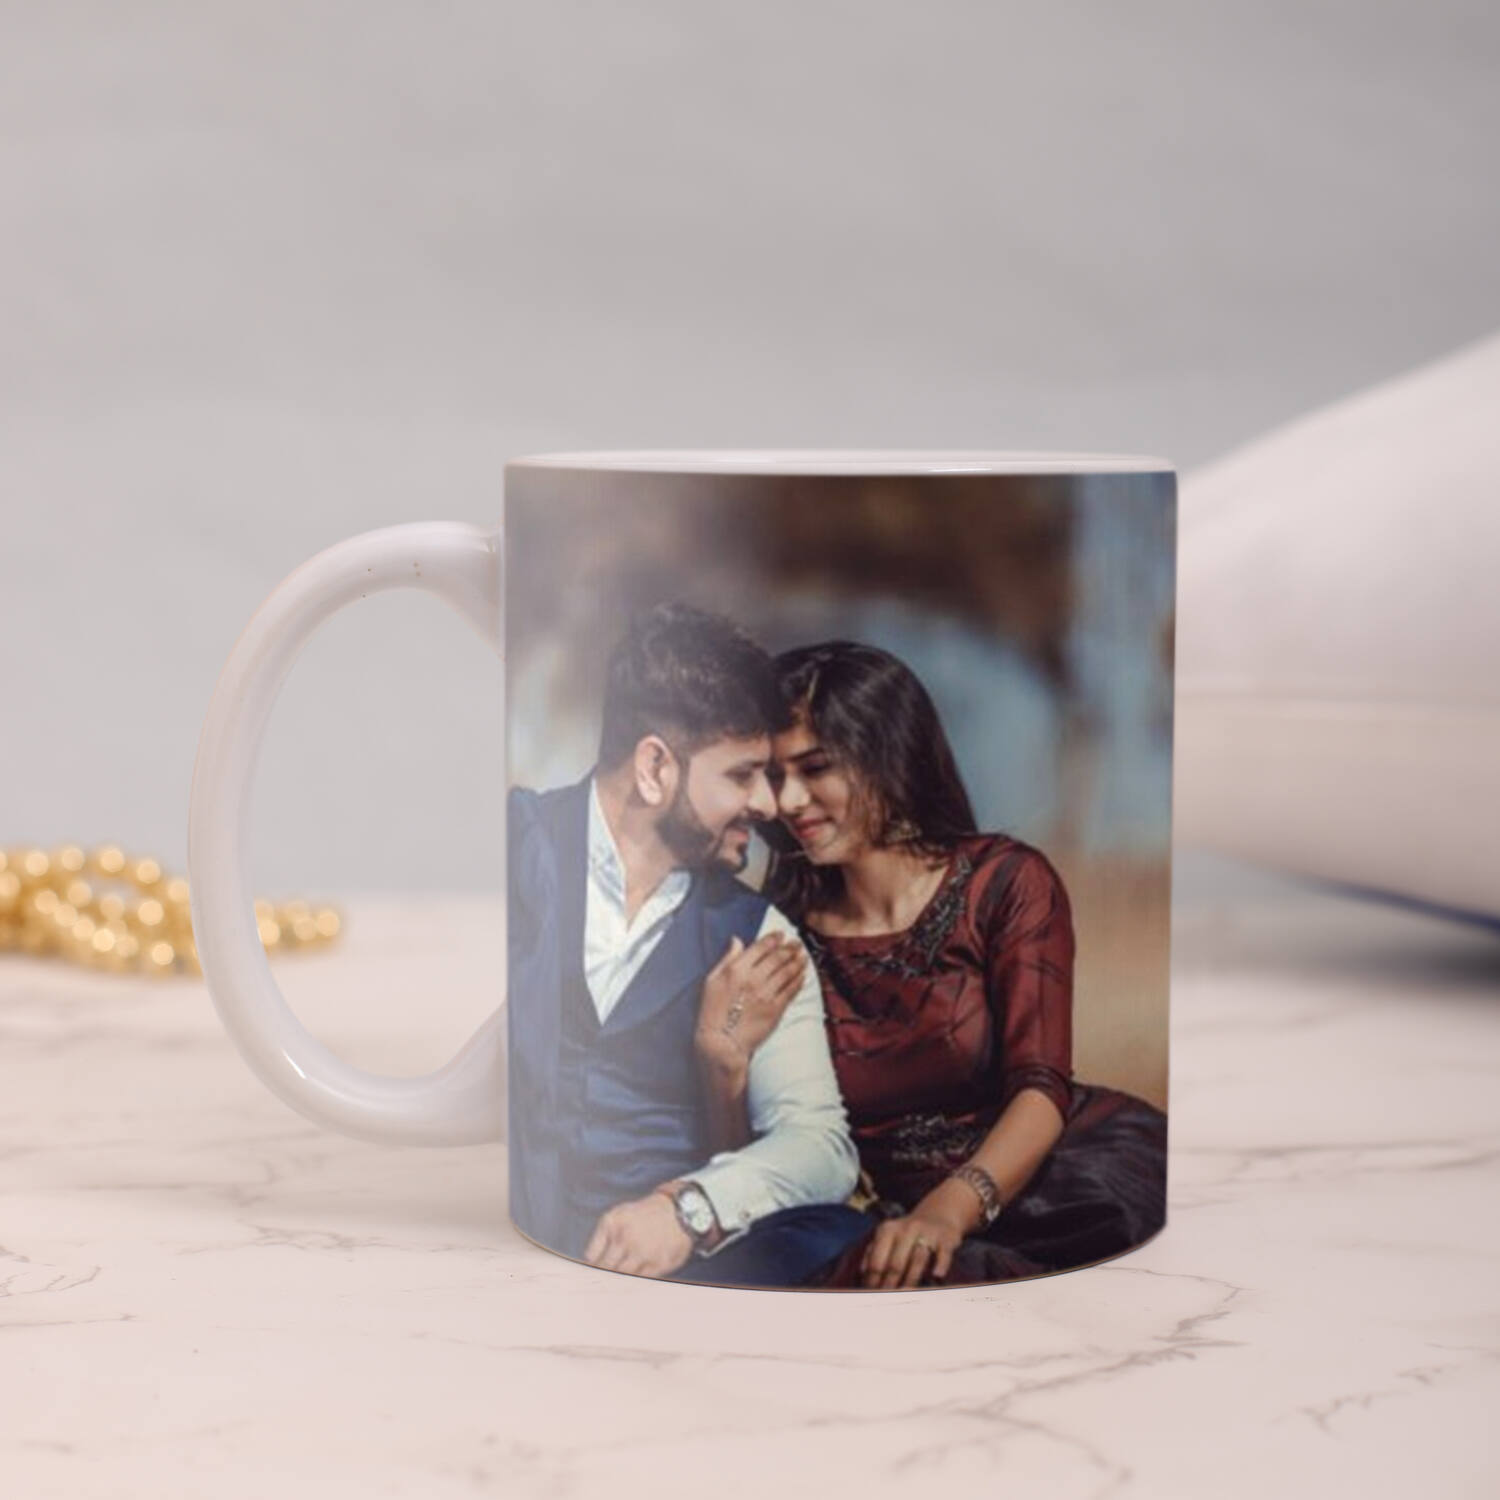 Birthday Gifts for Romantic Husband - Buy Birthday Gift for Romantic Husband,  Online Birthday Gifts - IGP.com